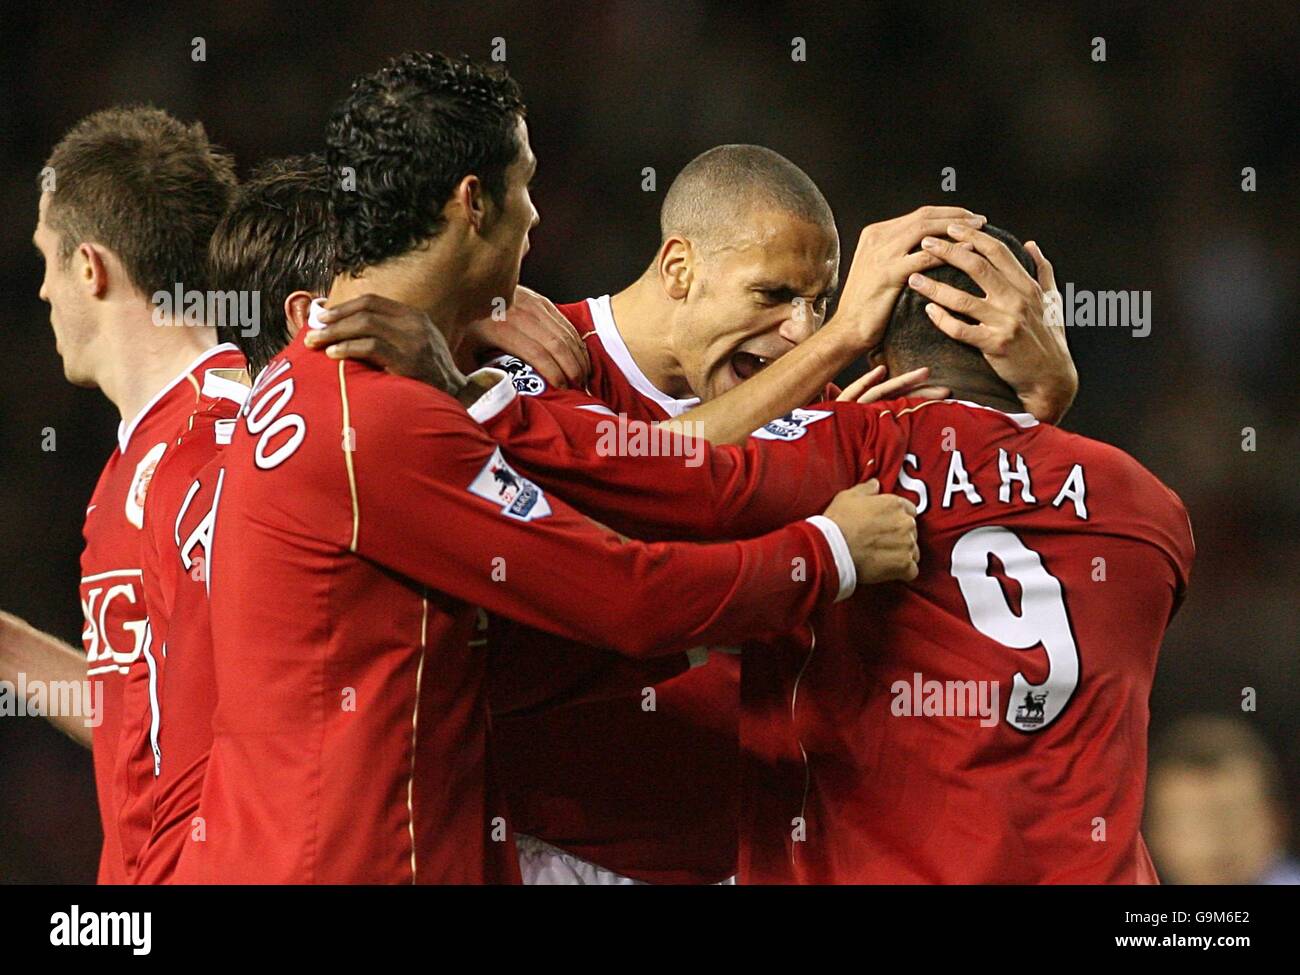 Soccer - FA Barclays Premiership - Manchester United v Chelsea - Old Trafford. Manchester United players congratulate goal scorer Louis Saha. Stock Photo